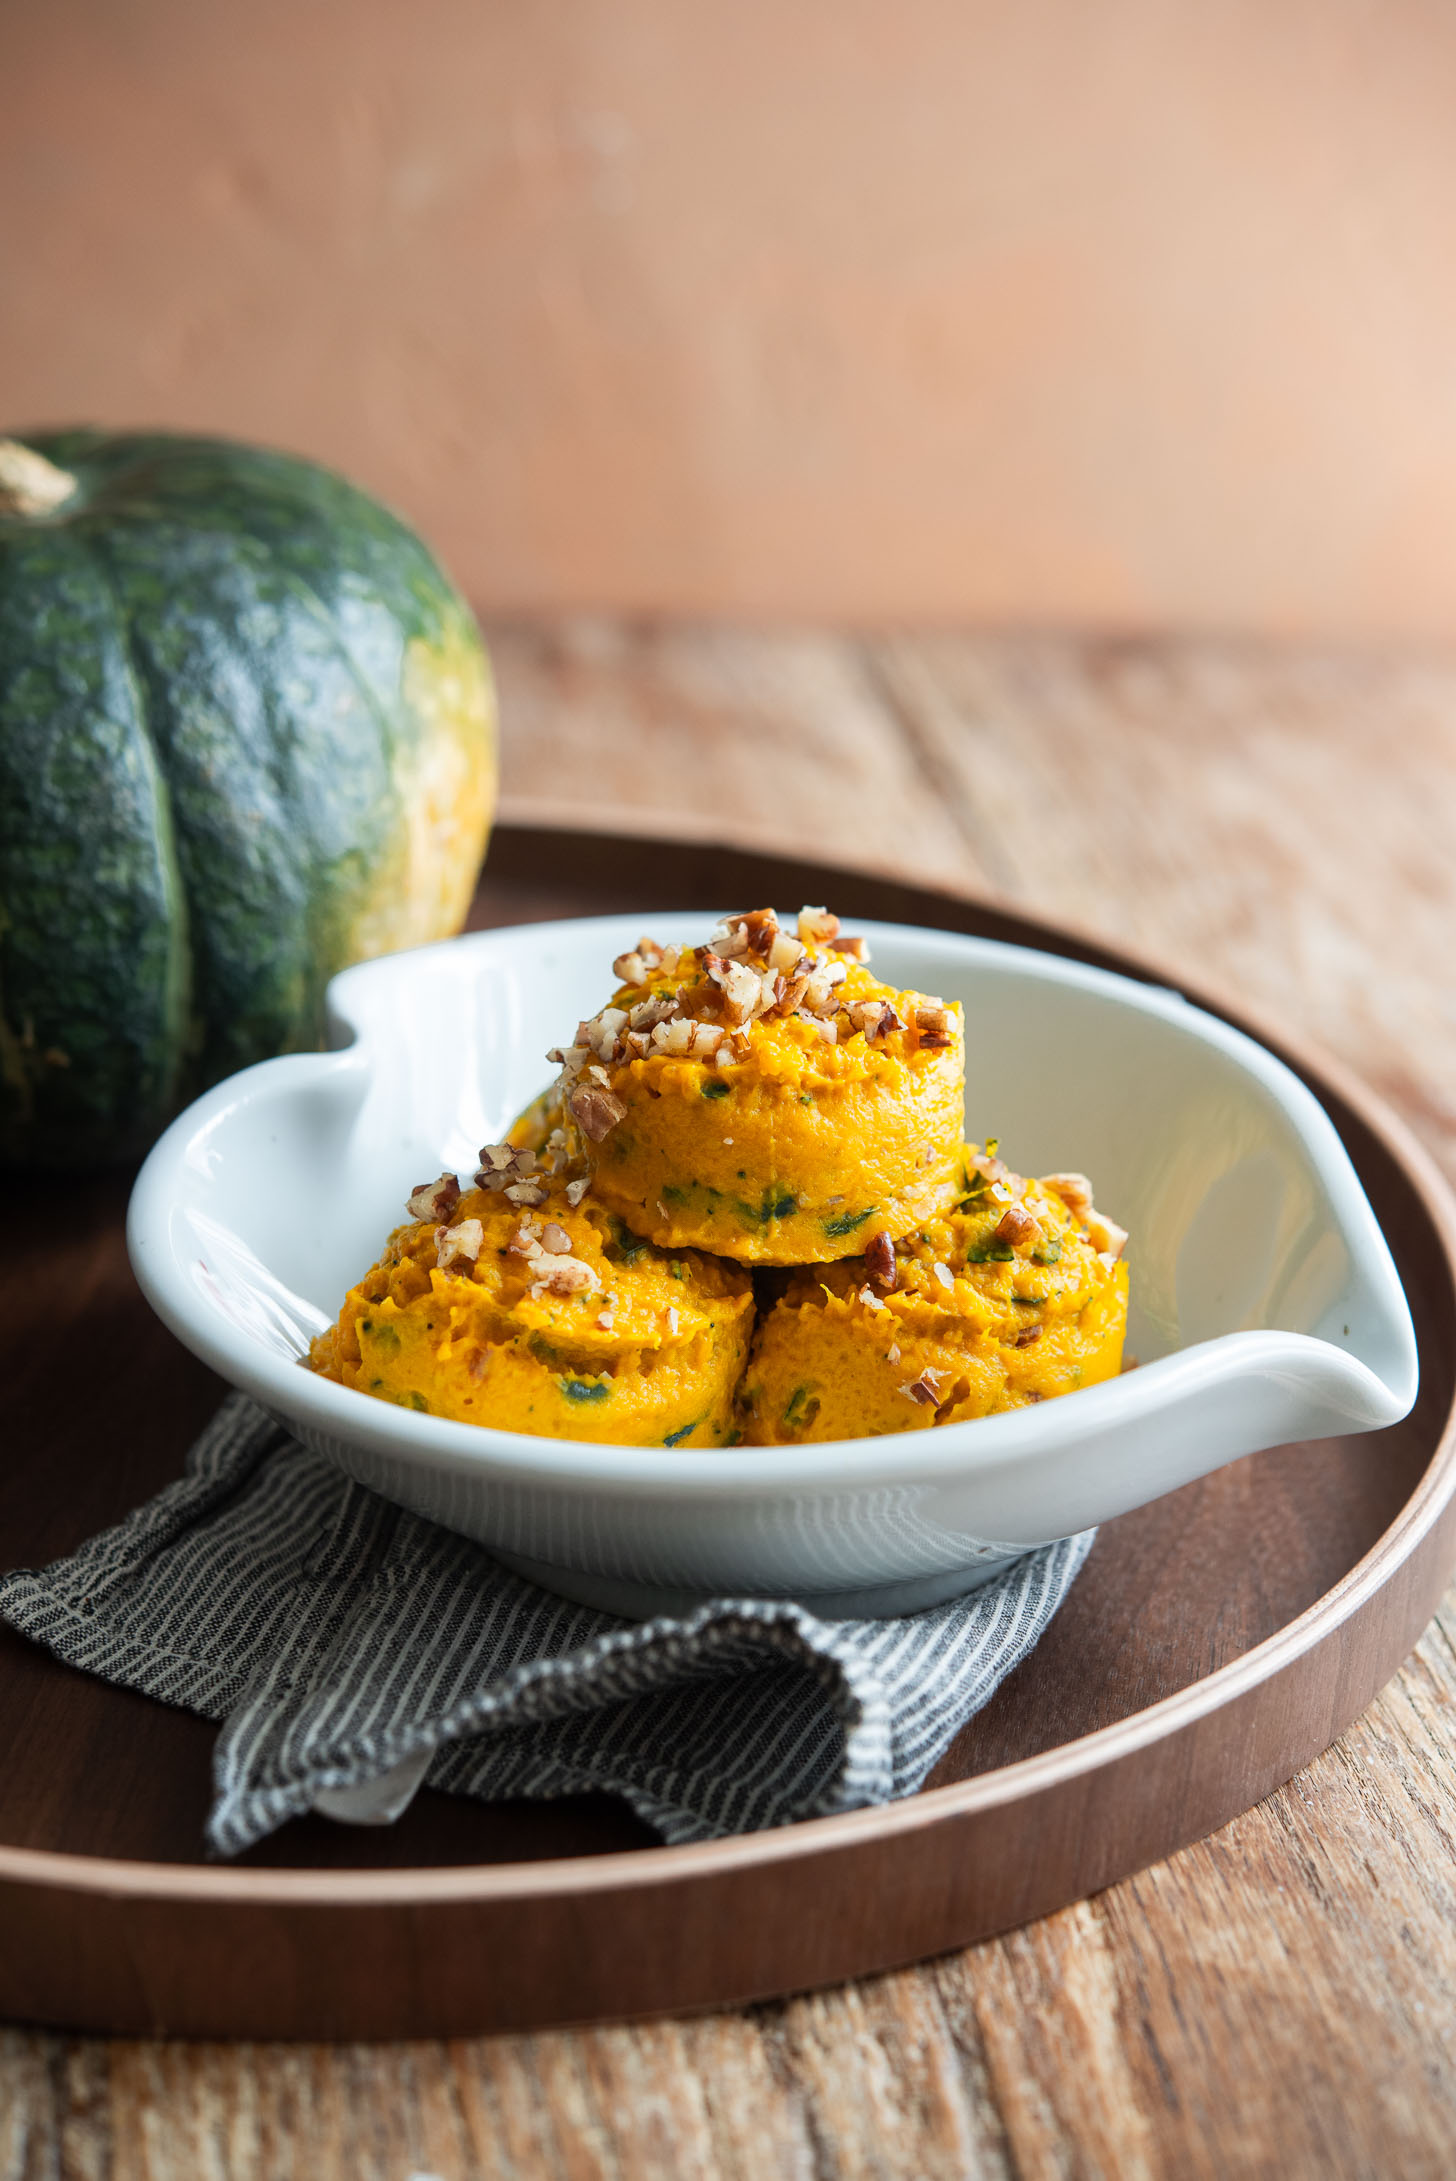 Scoops of kabocha salad served in a bowl and garnished with chopped nuts on top.